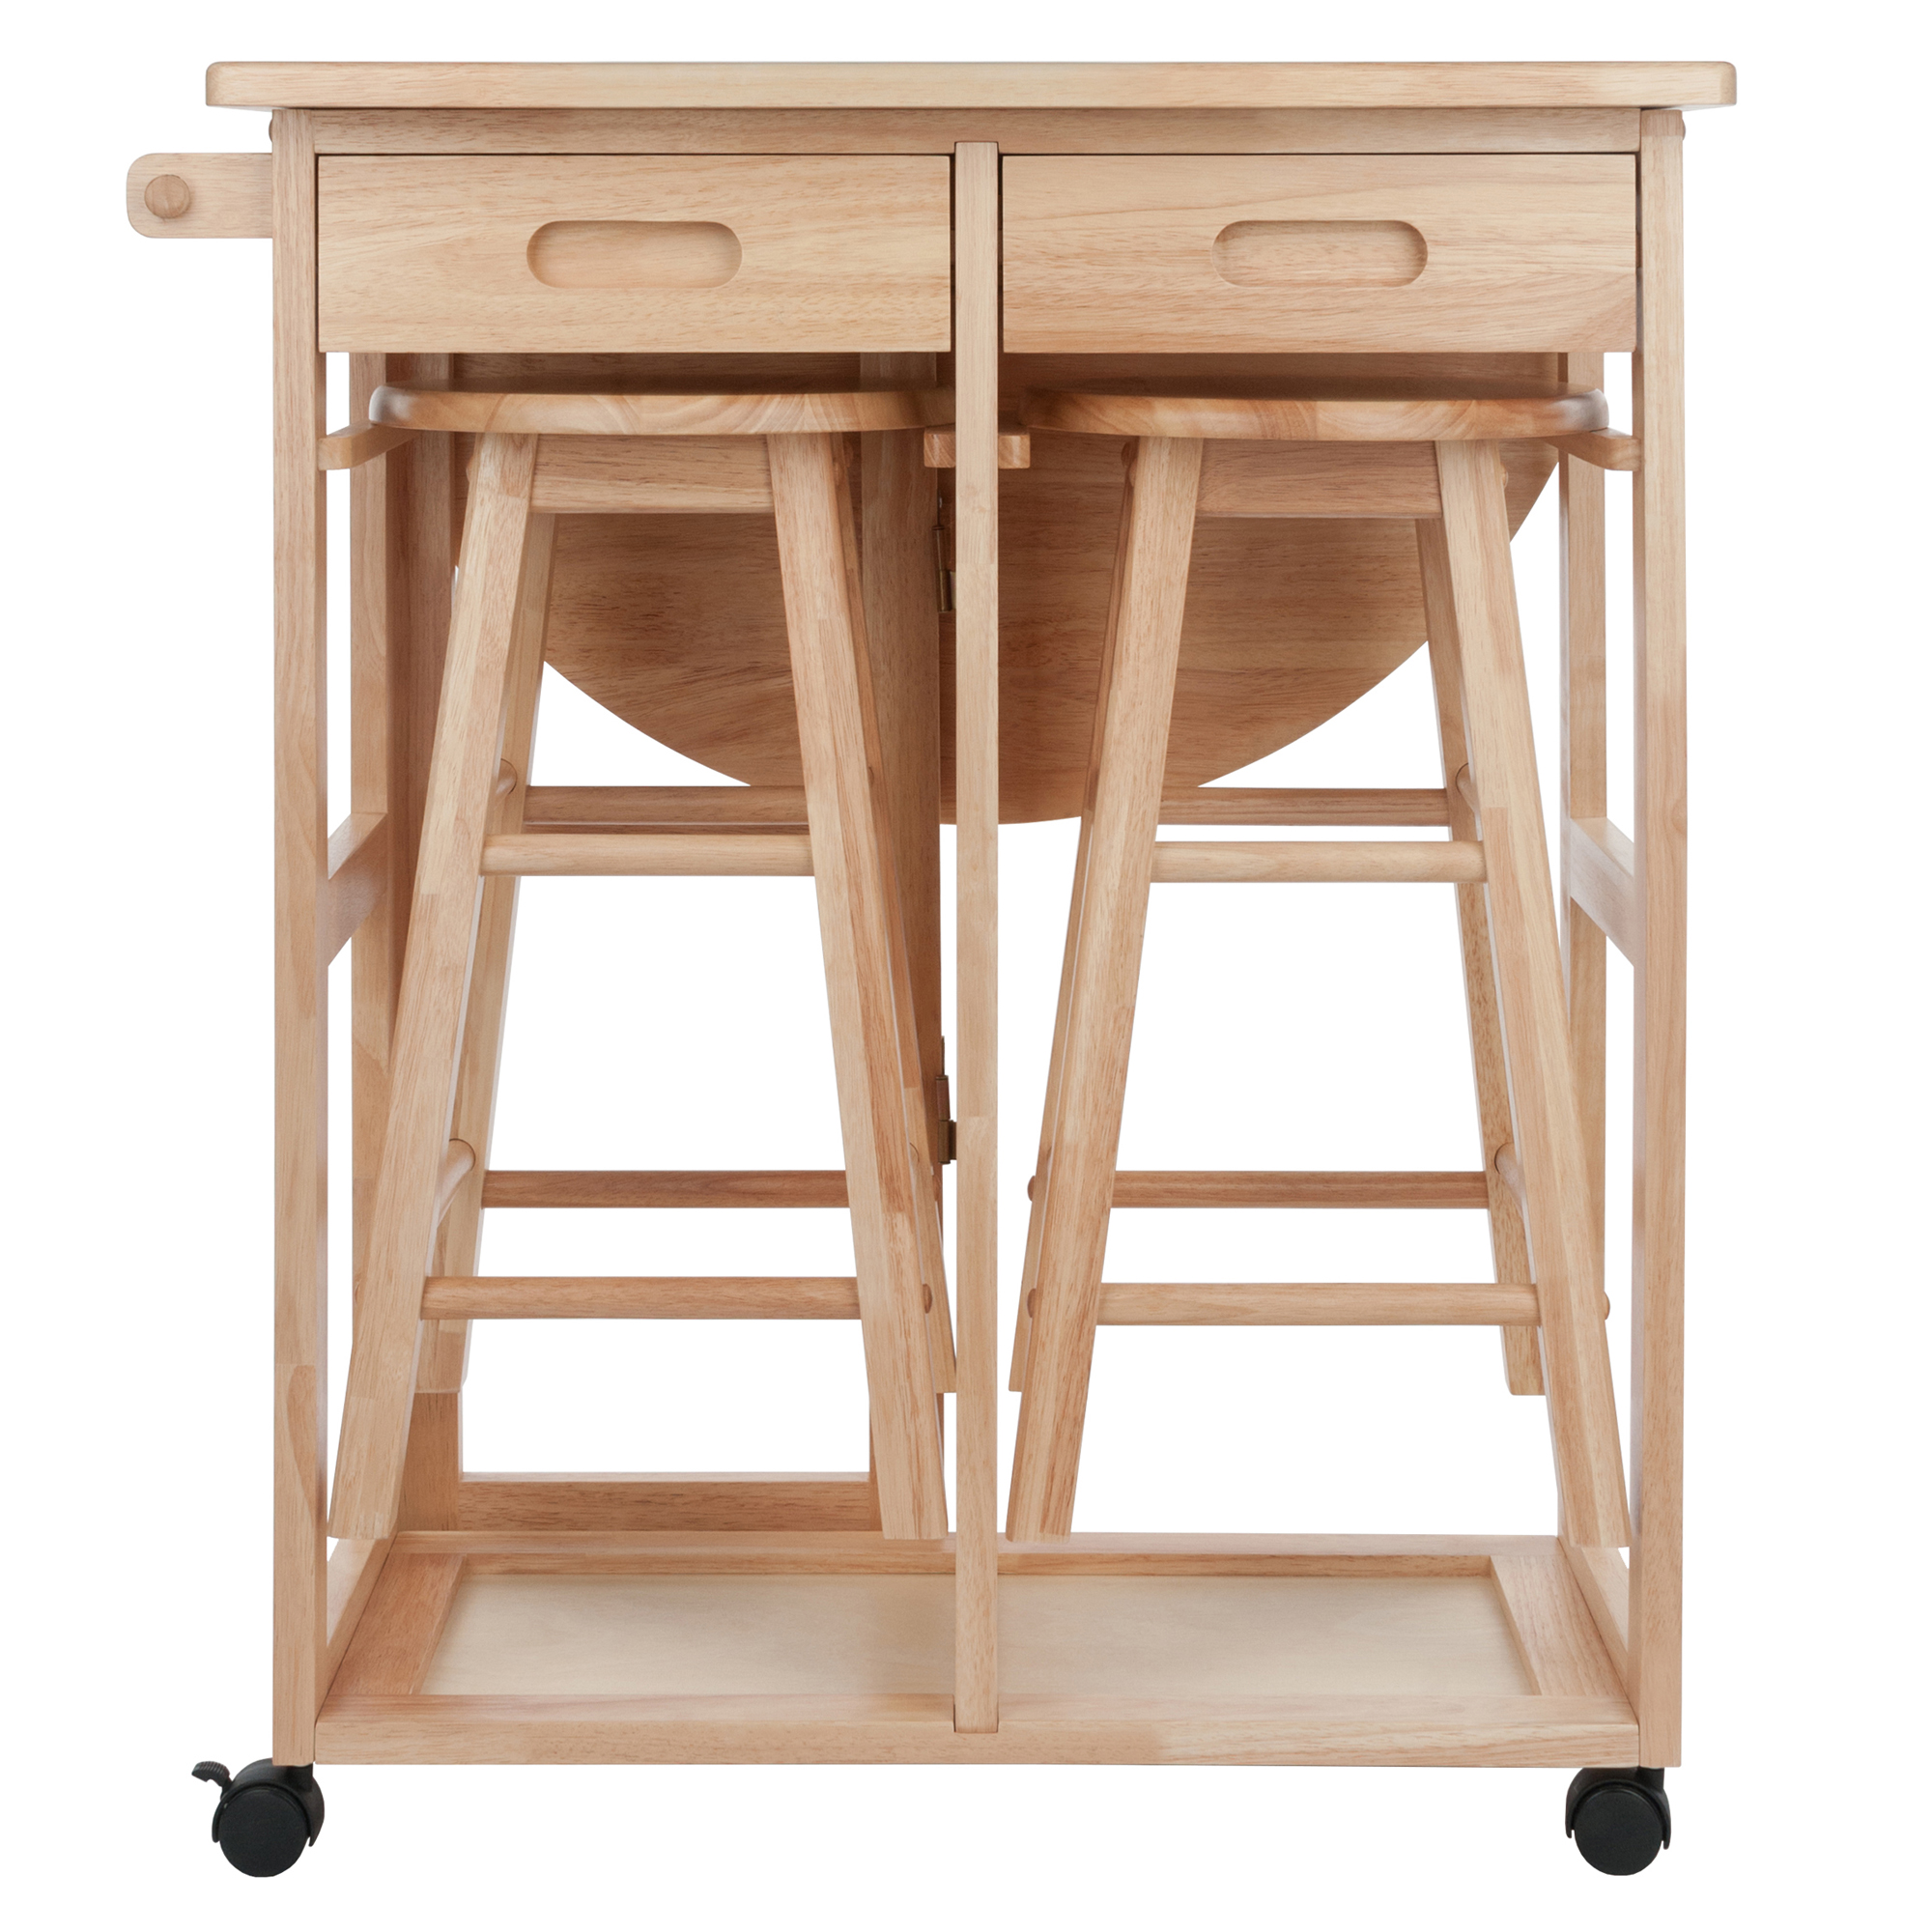 Winsome Wood Burnett 3-Pc Space Saver Set, 2 Tuck - away Stools, Natural Finish - image 4 of 14